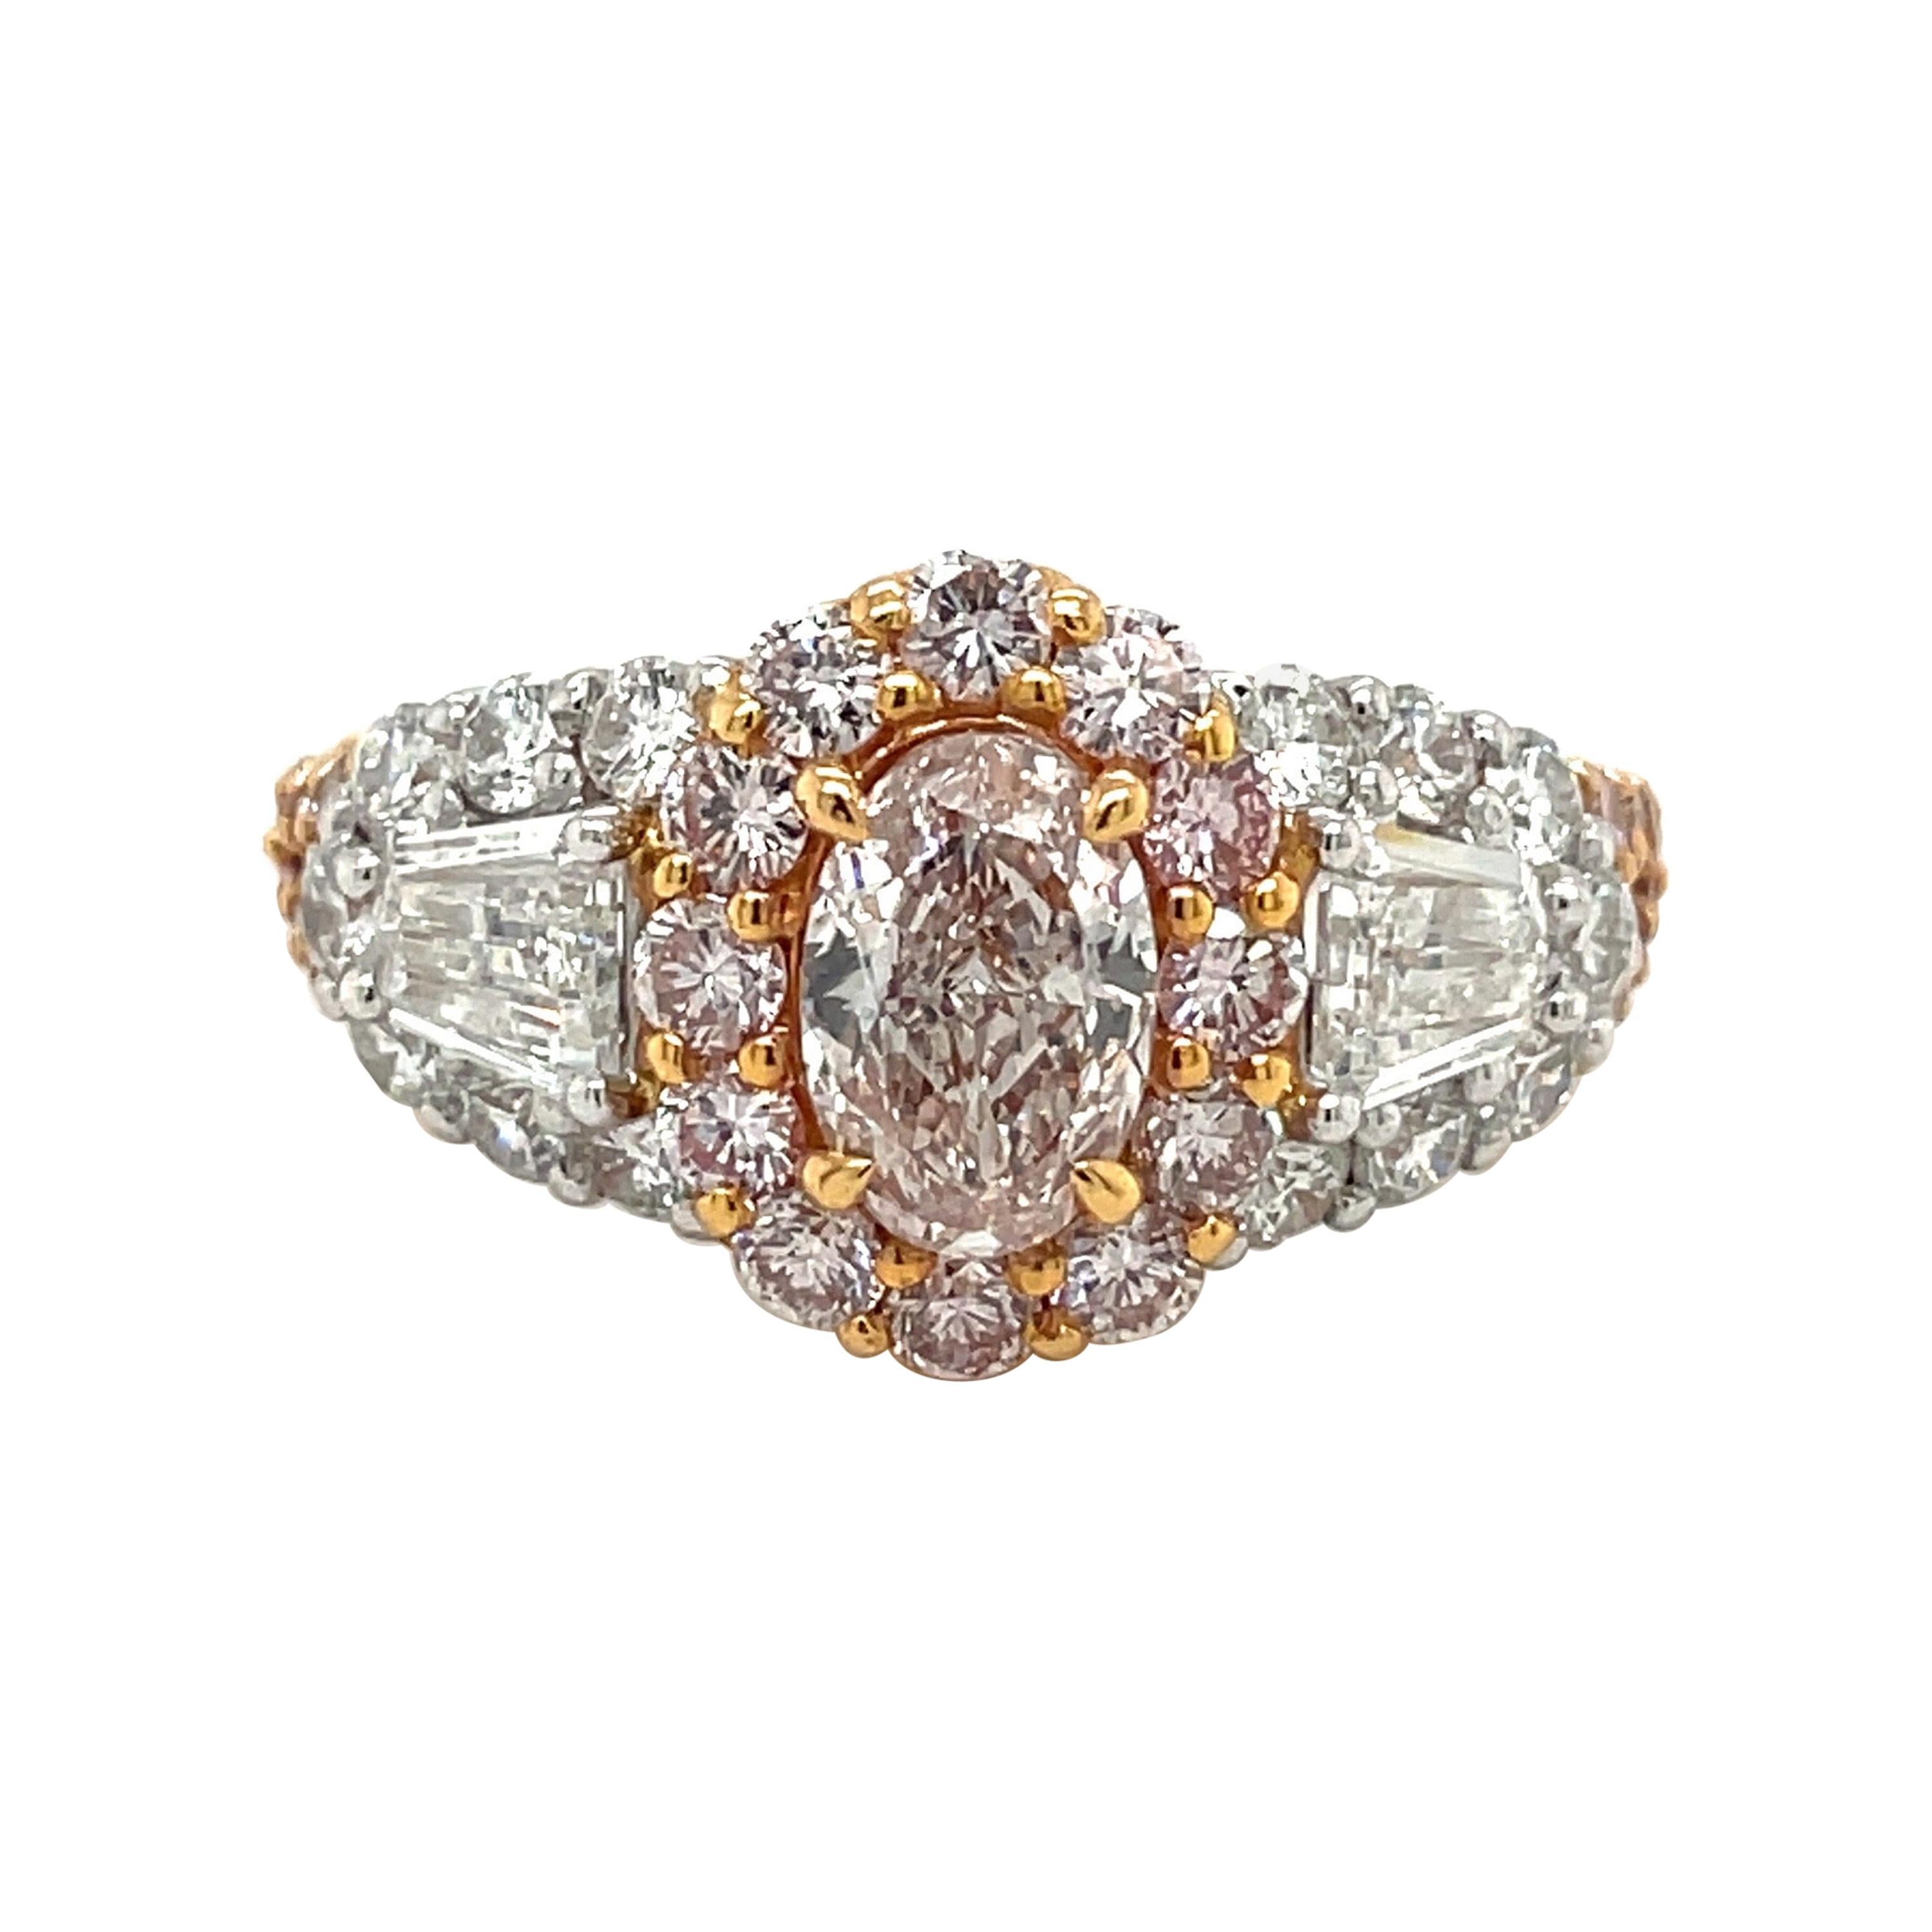 Fancy Light Pink Diamond Ring with White Diamonds Set in Rose Gold and Platinum For Sale